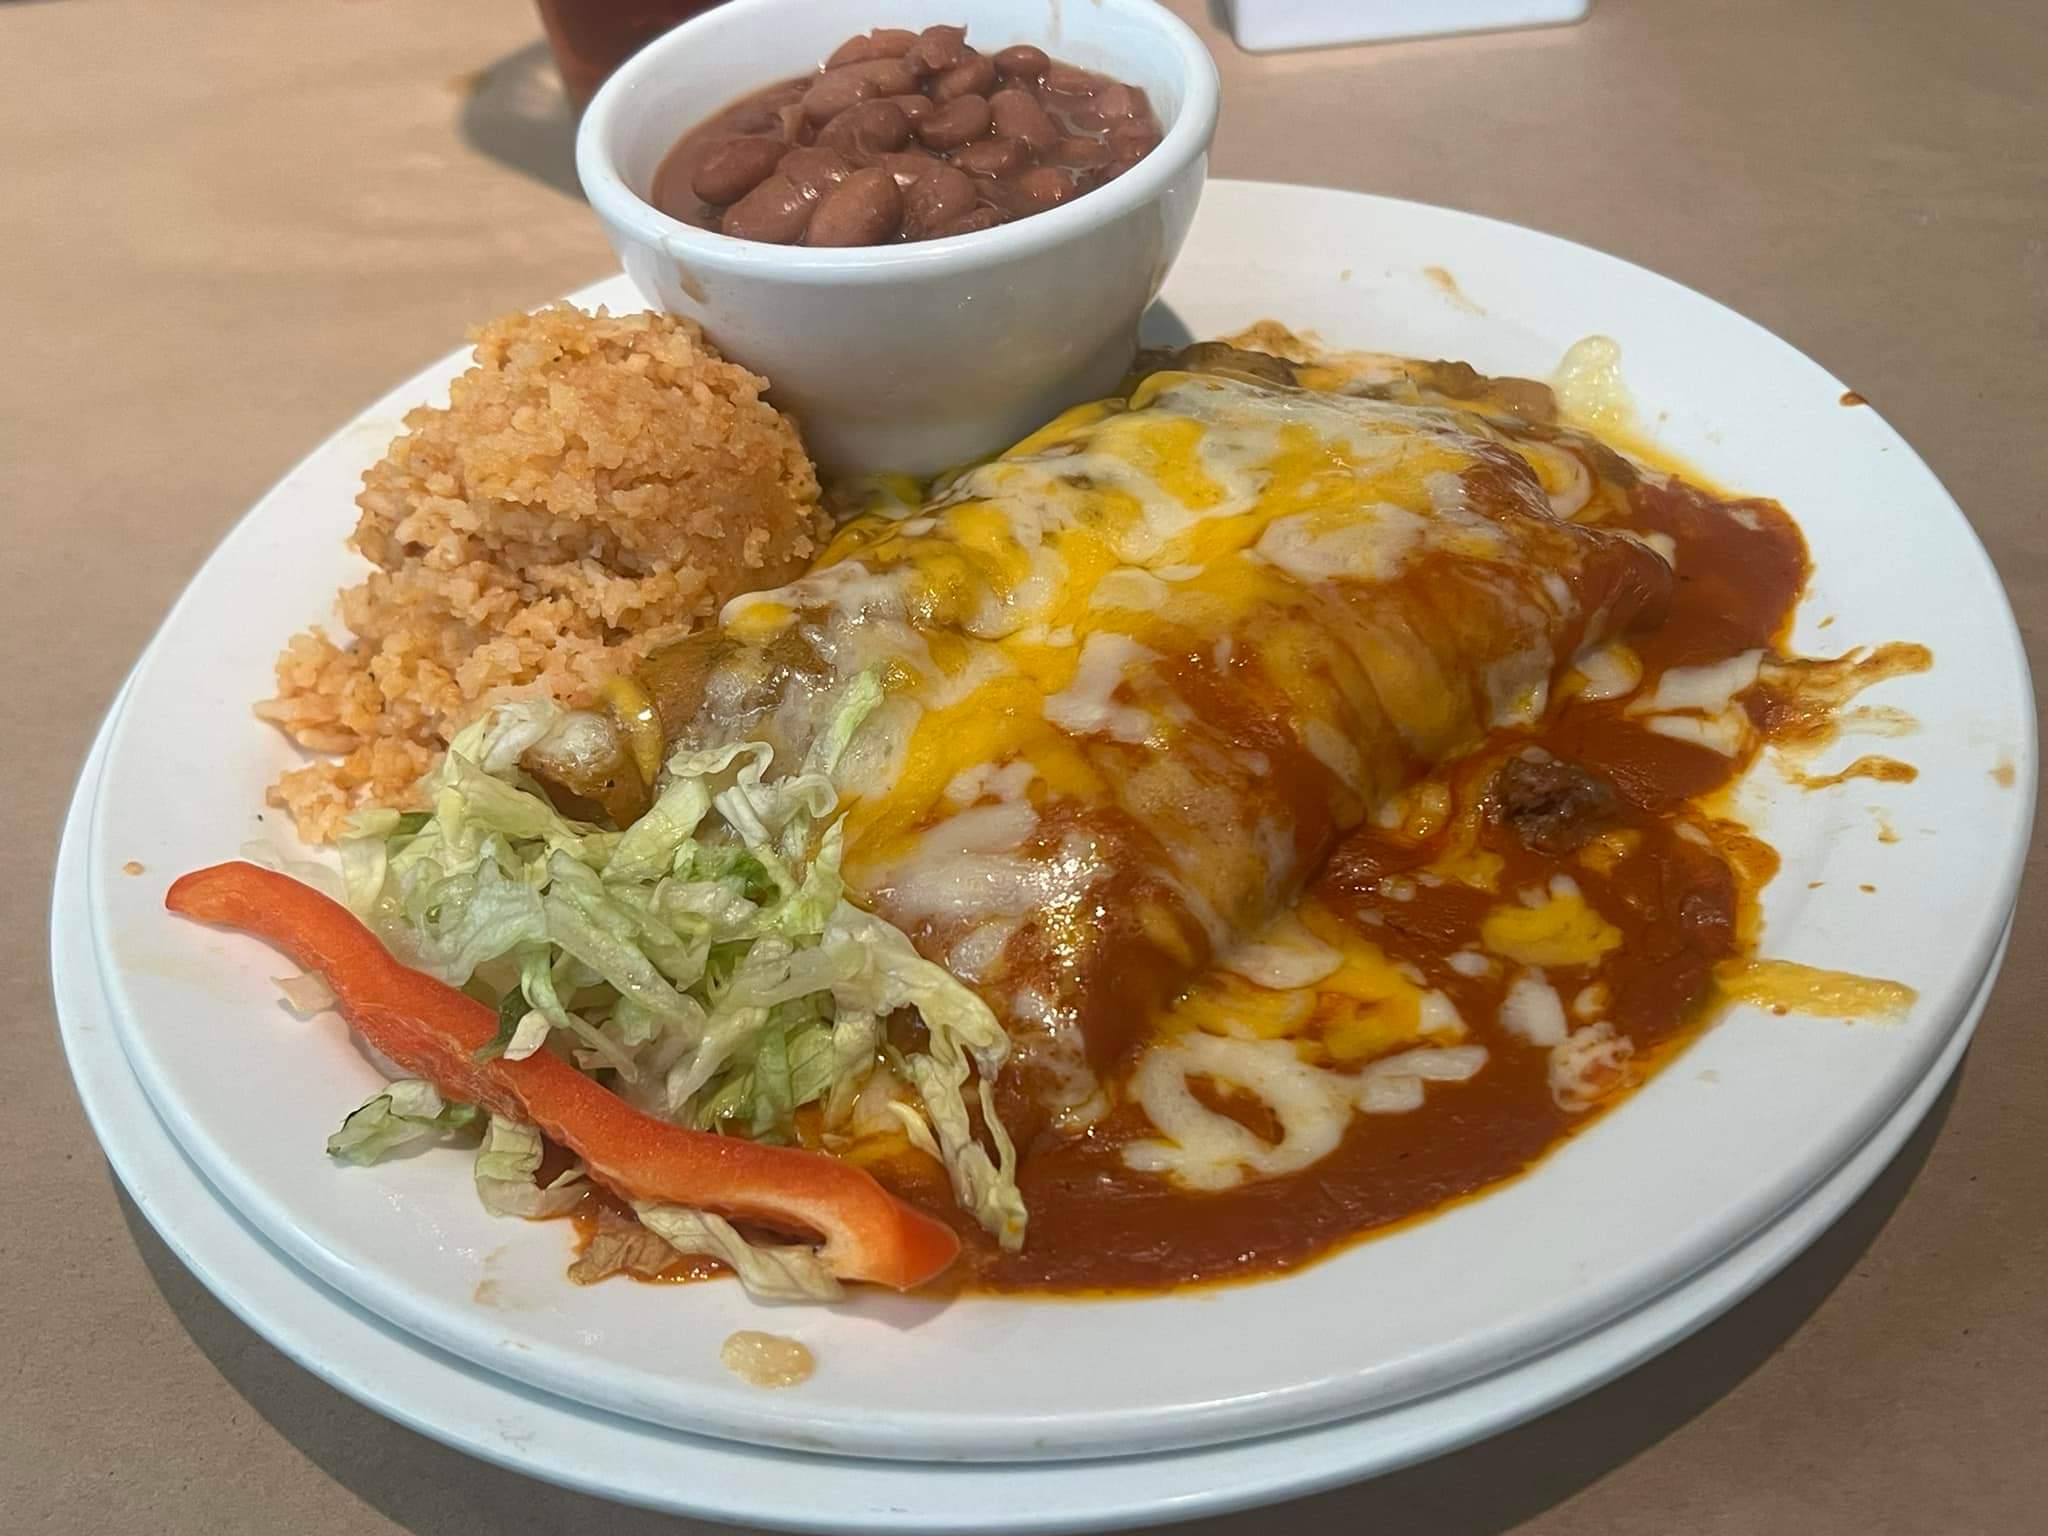 Red Chile Beef and Green Chile Chicken Enchiladas with Rice and Beans